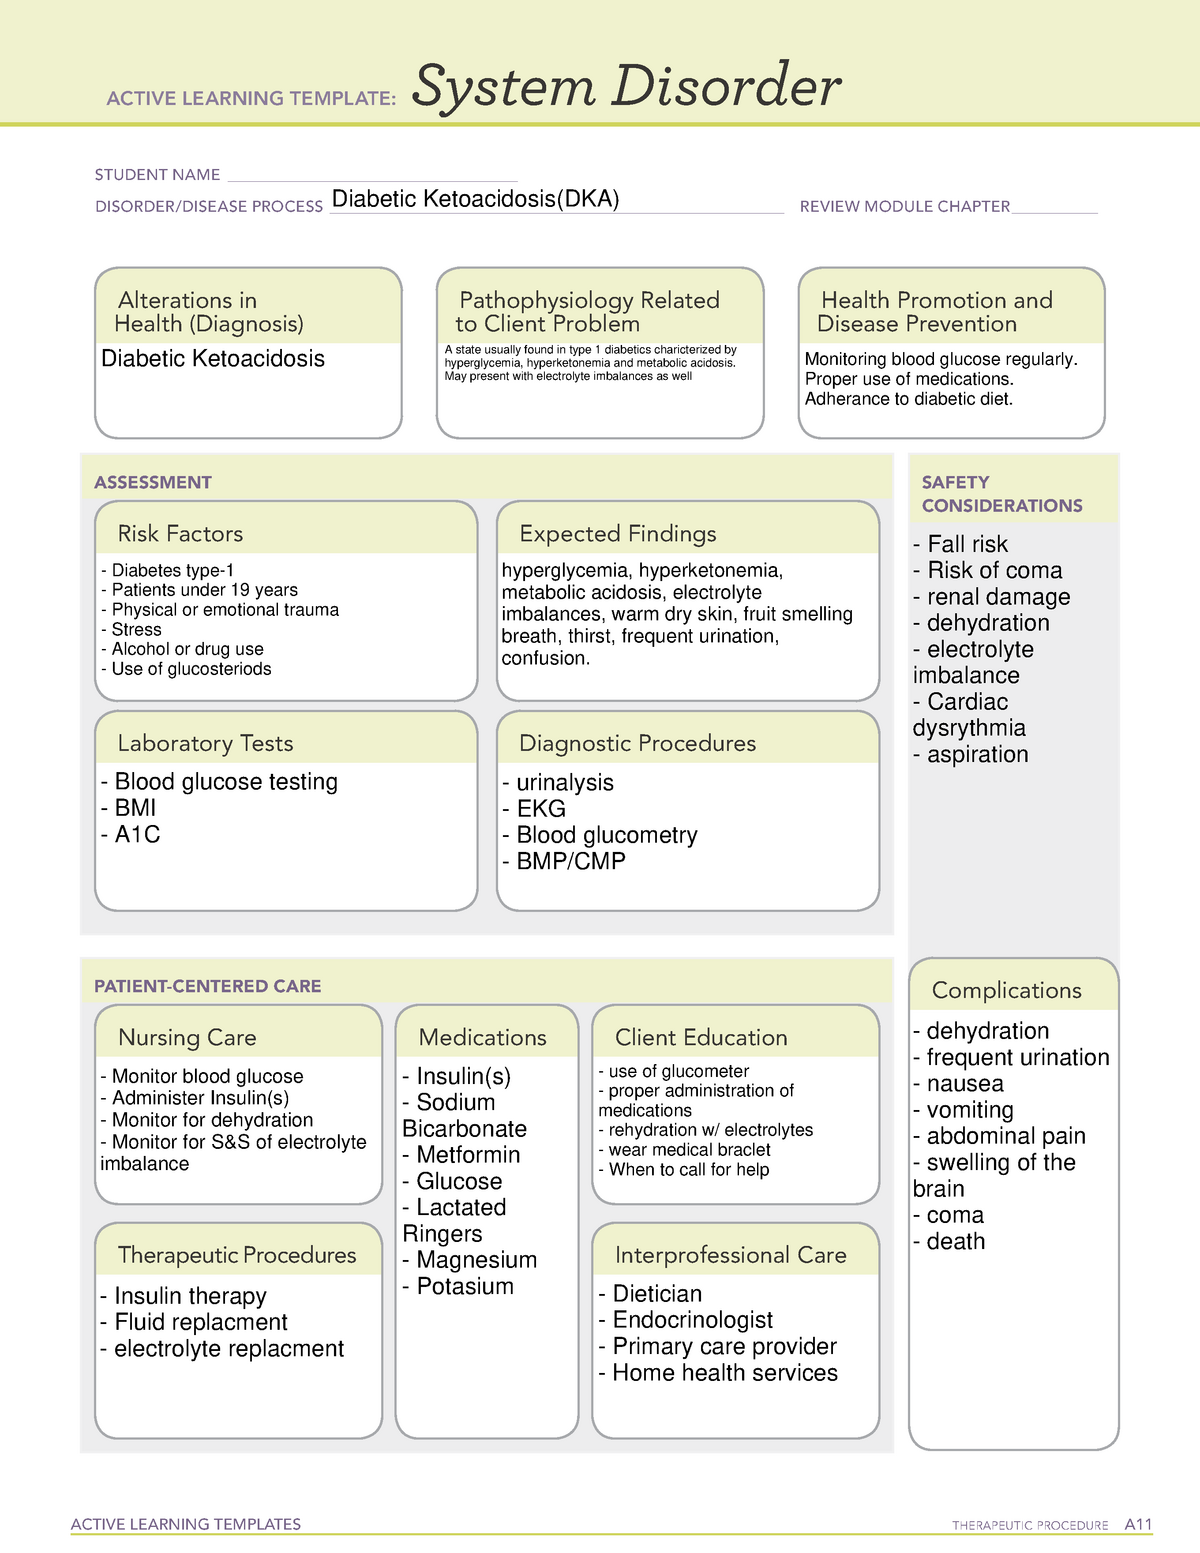 DKA system disorder Template ACTIVE LEARNING TEMPLATES THERAPEUTIC